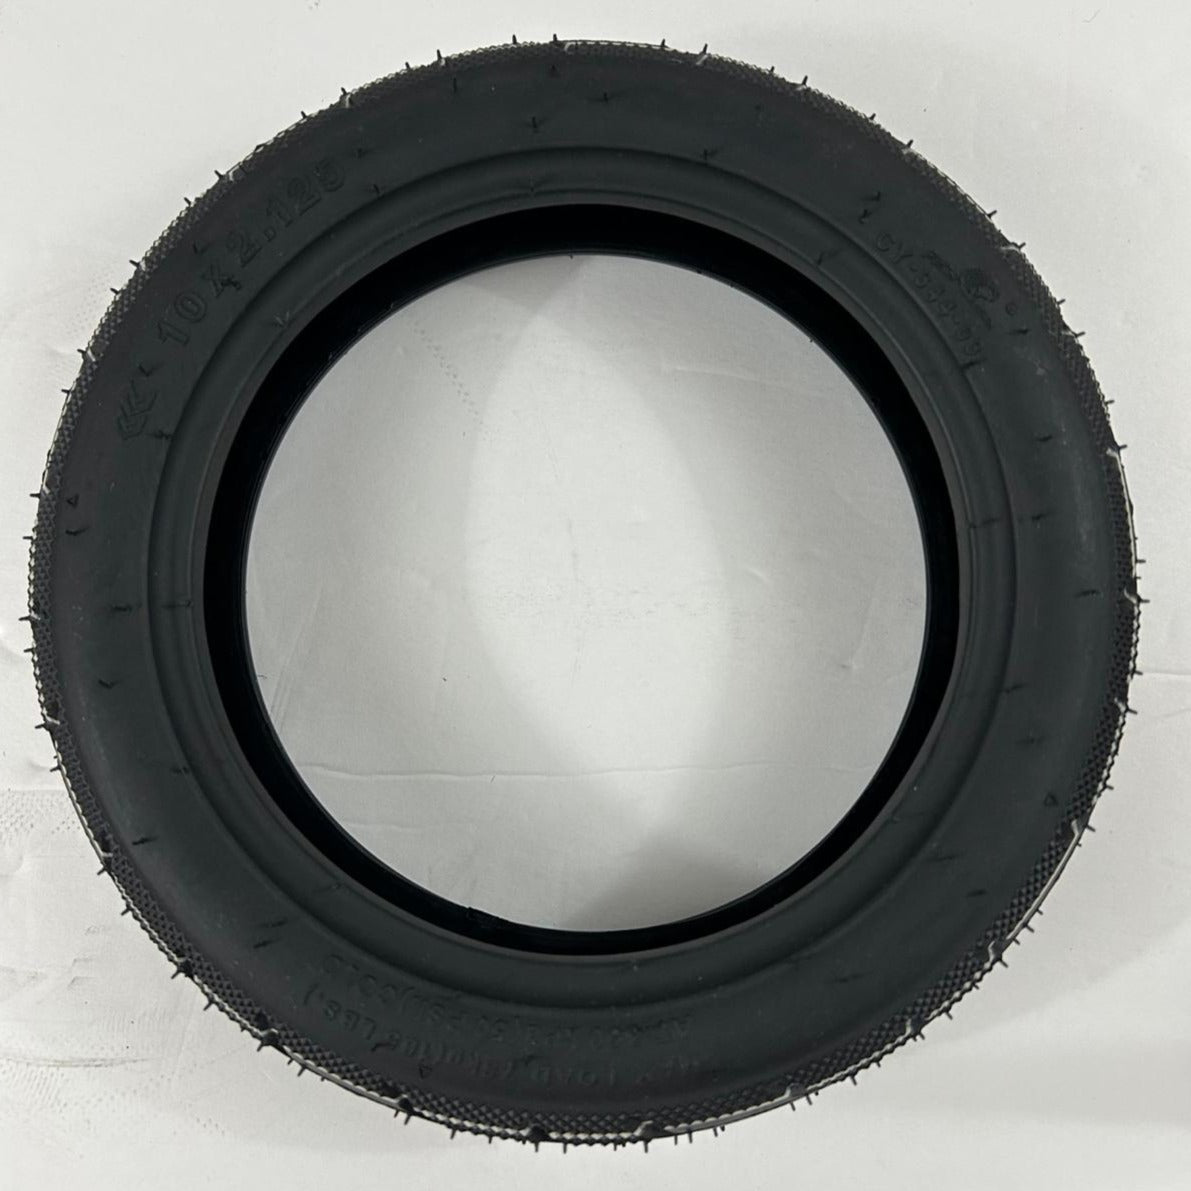 Outer tire for Ninebot Model F Series (After Market)